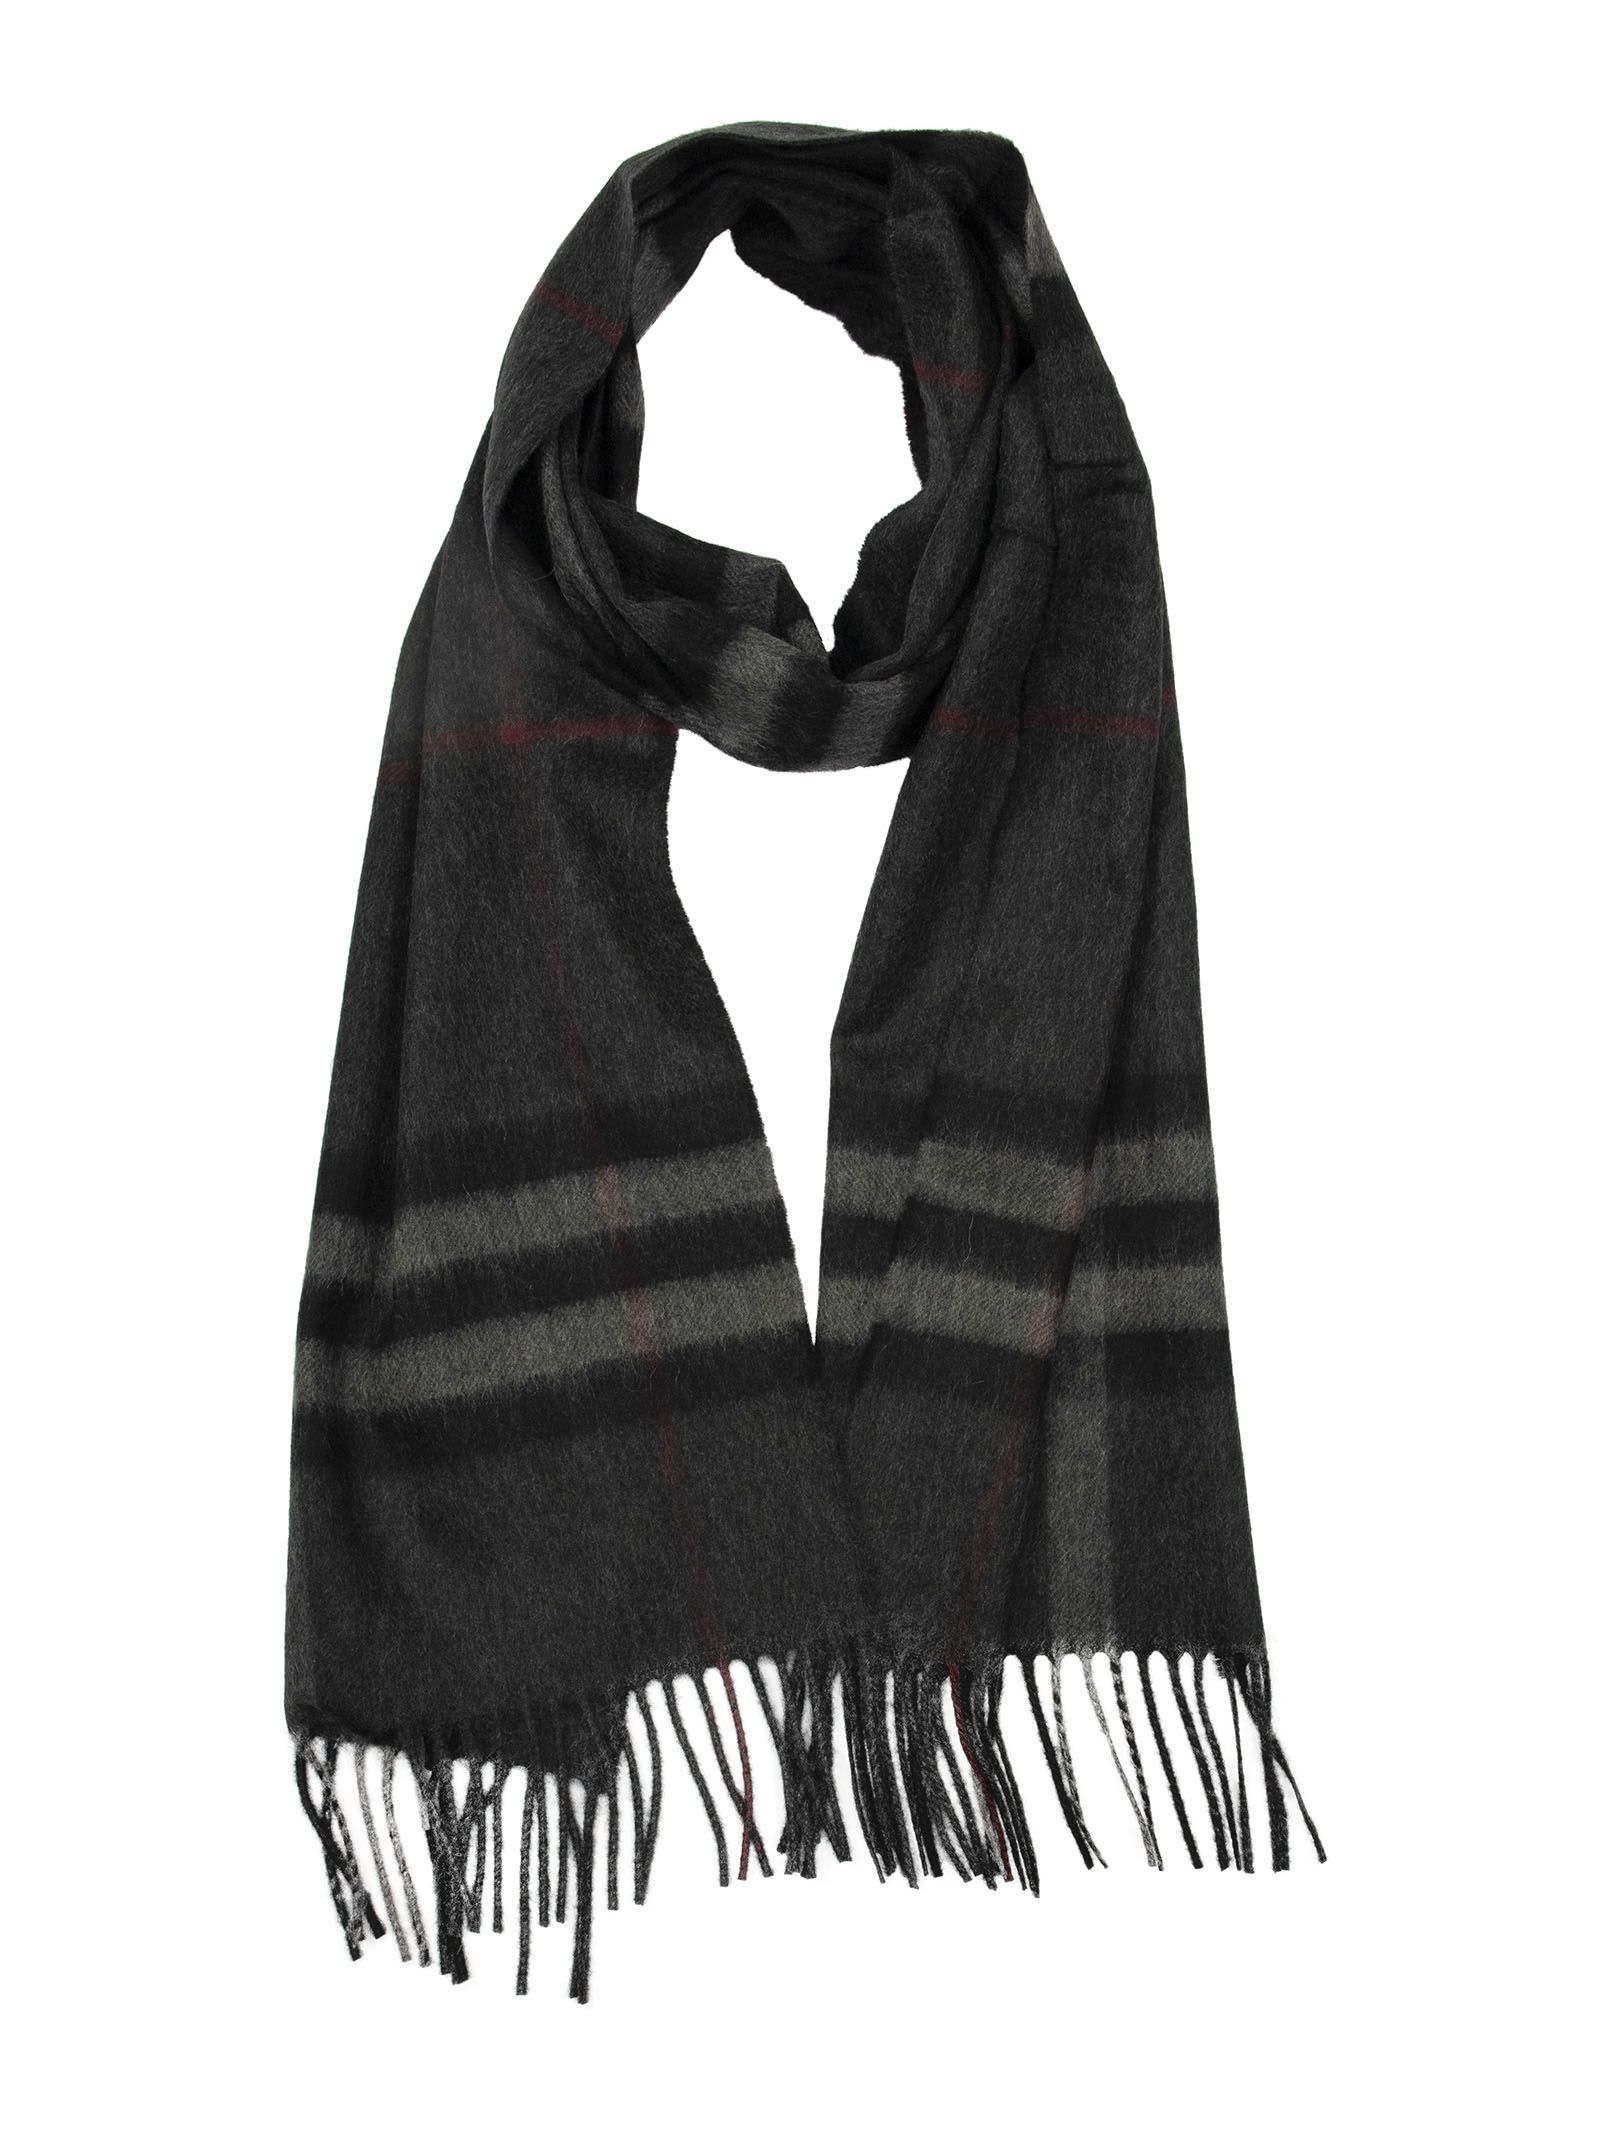 burberry scarf charcoal